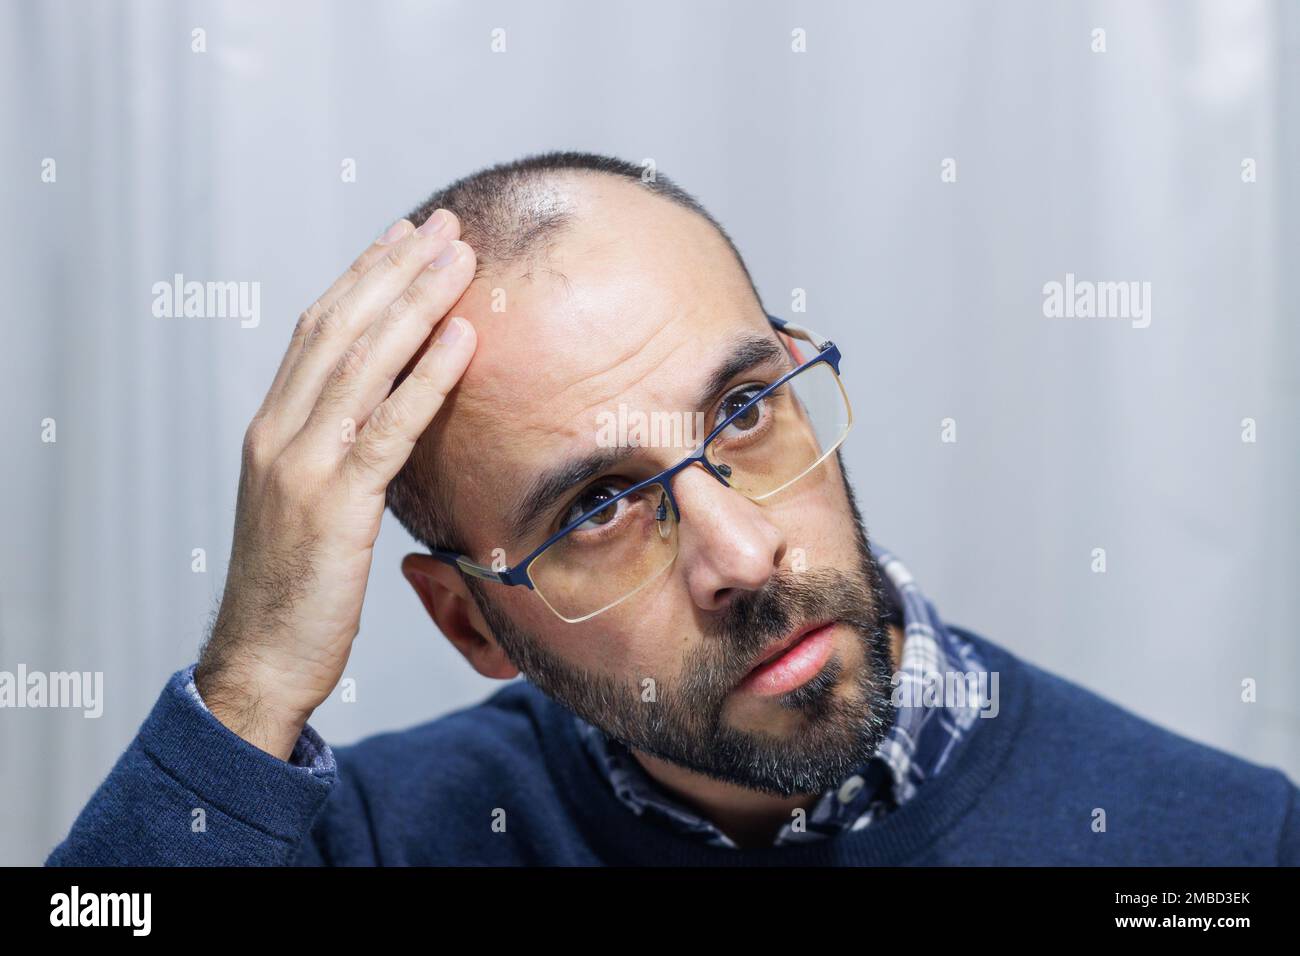 Young man with alopecia looking at his head and hair in the mirror Stock Photo